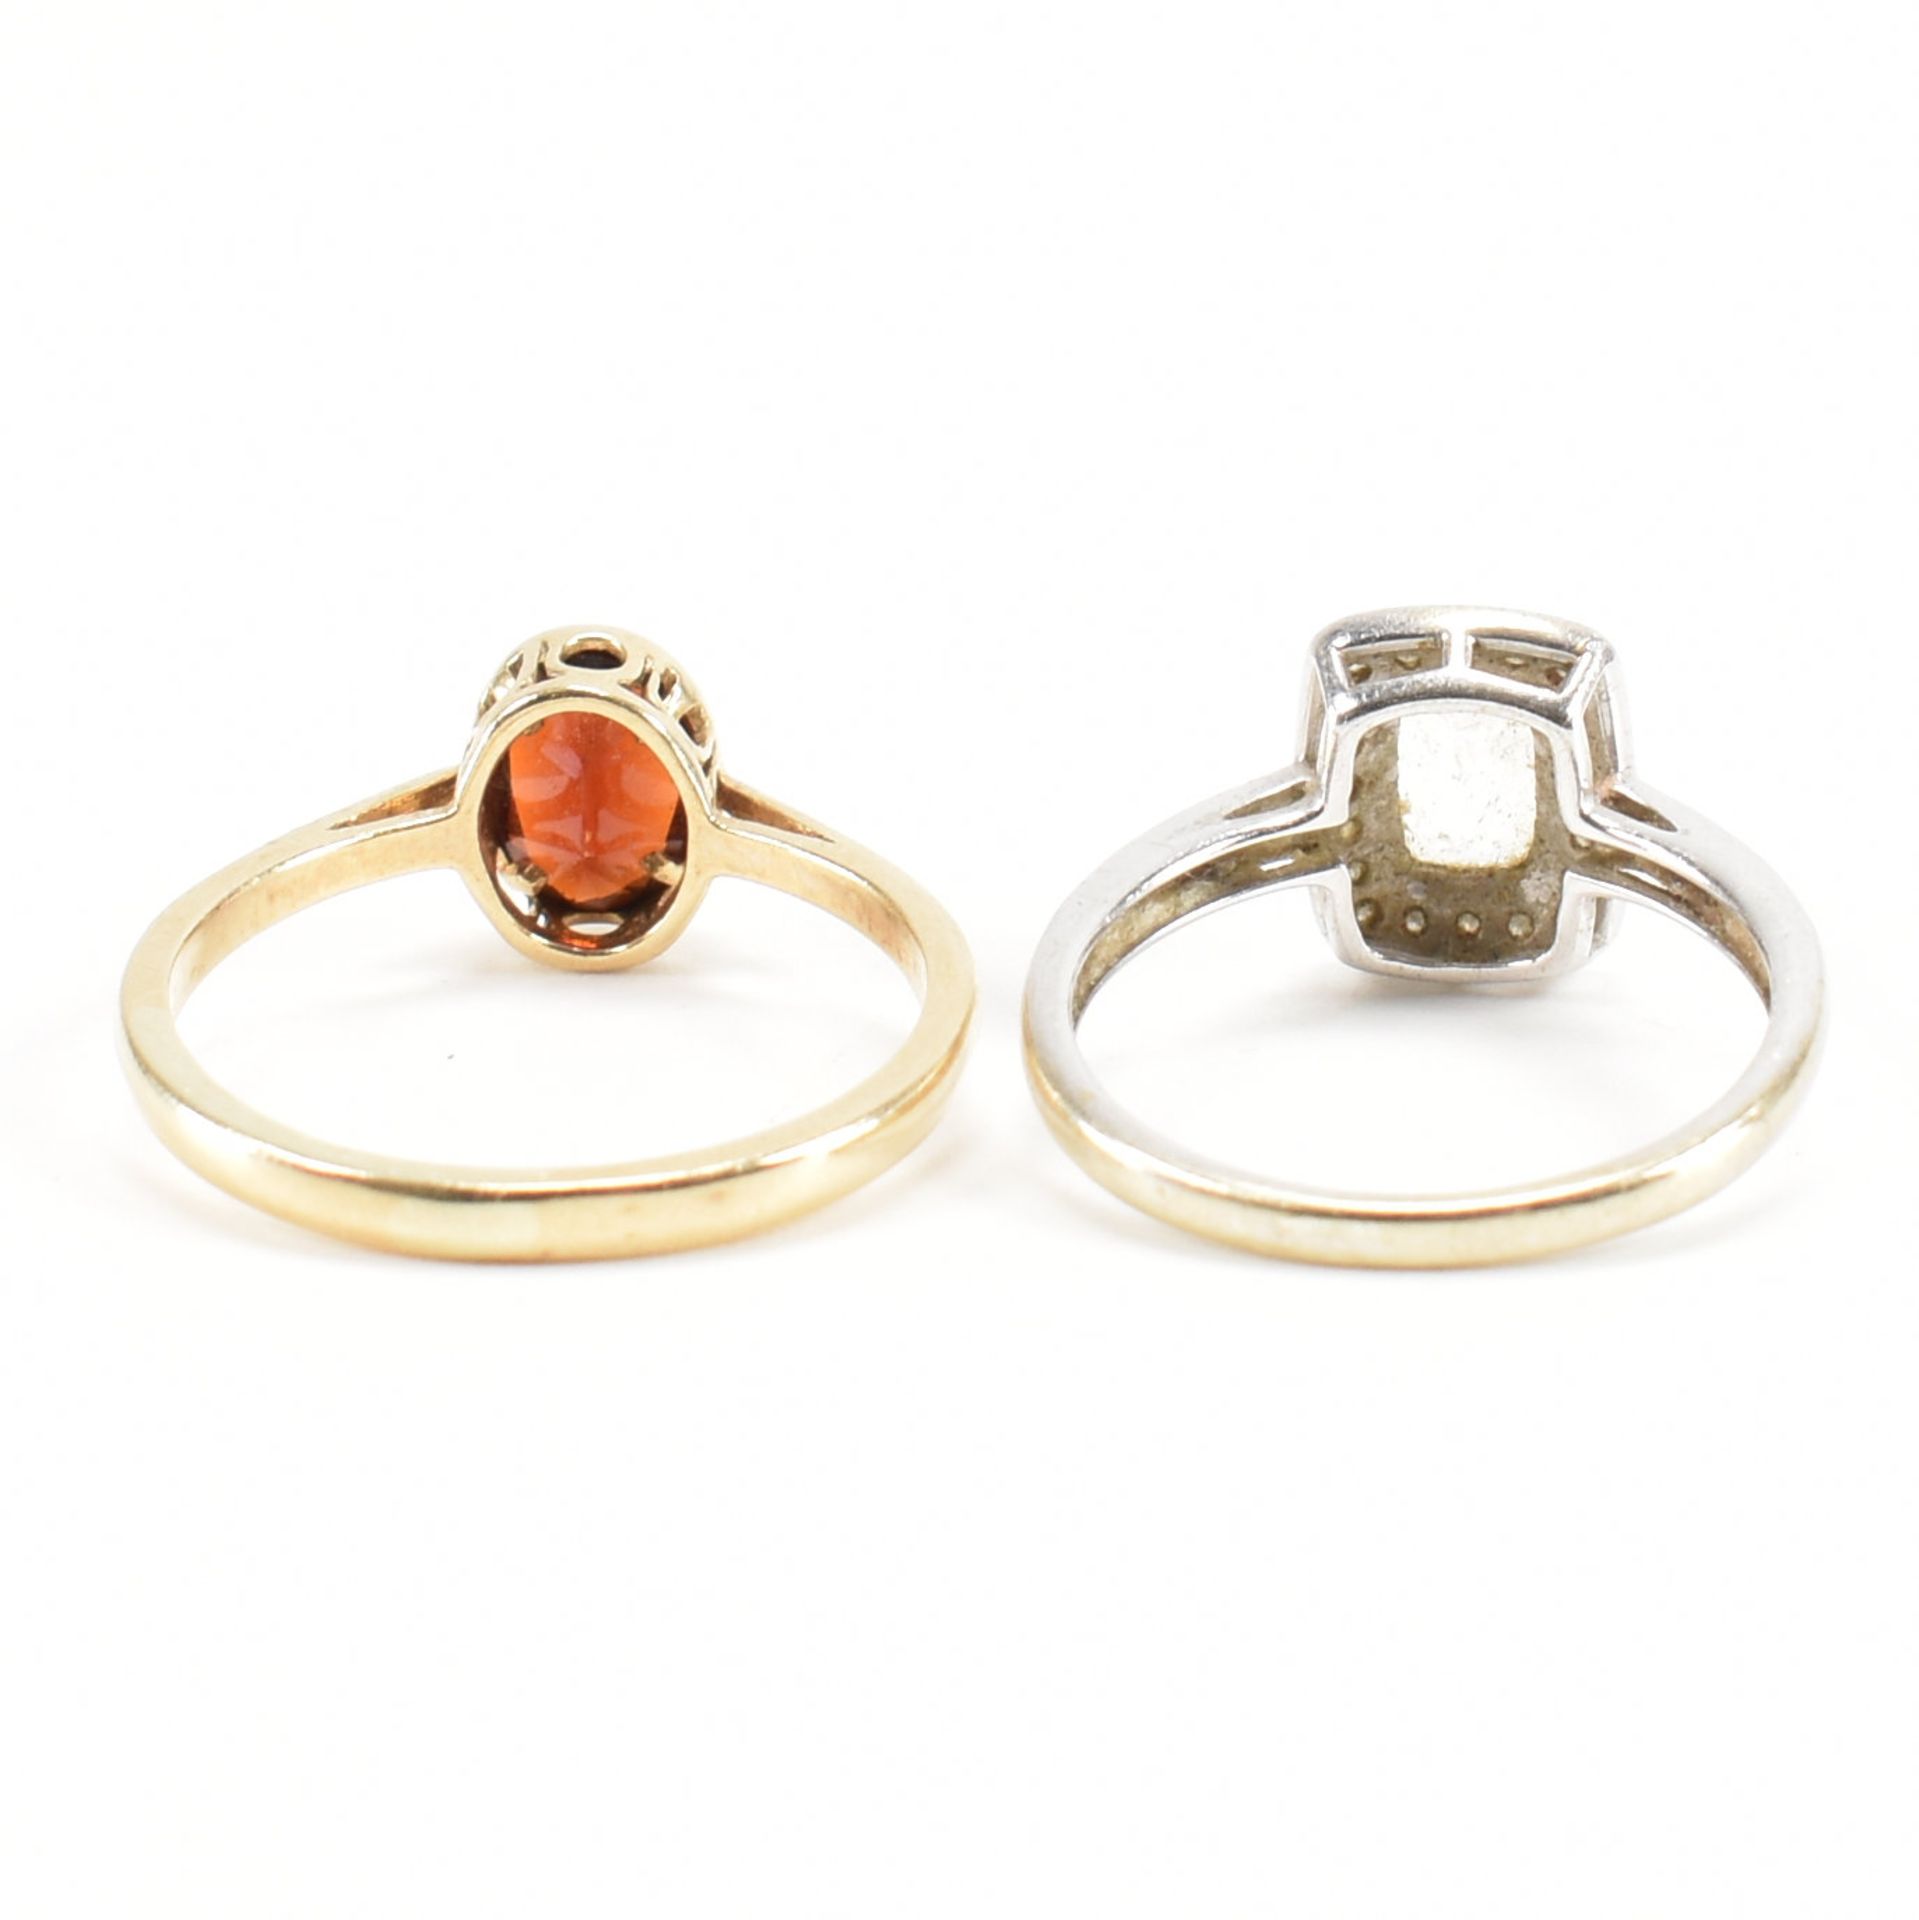 TWO HALLMARKED 9CT GOLD STONE SET RINGS - Image 3 of 8